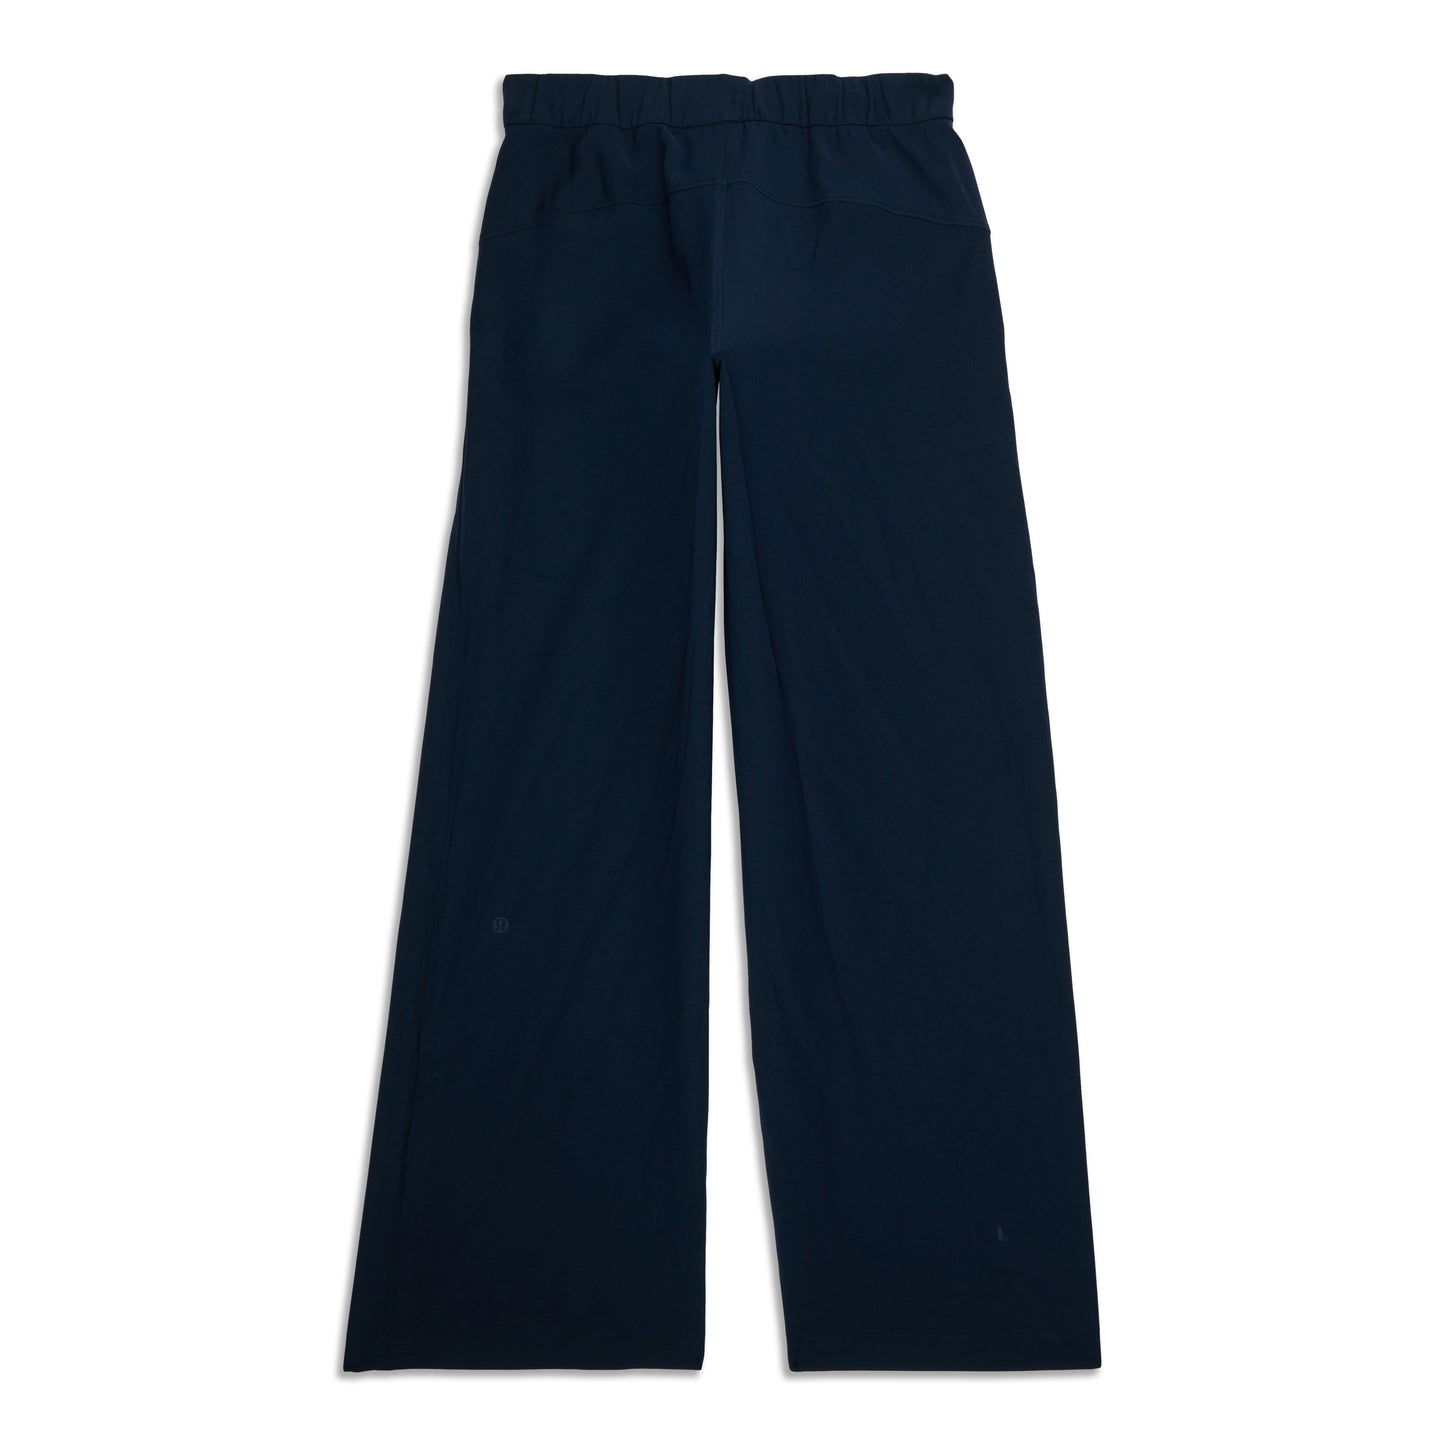 On The Fly Wide Leg Pant - Resale